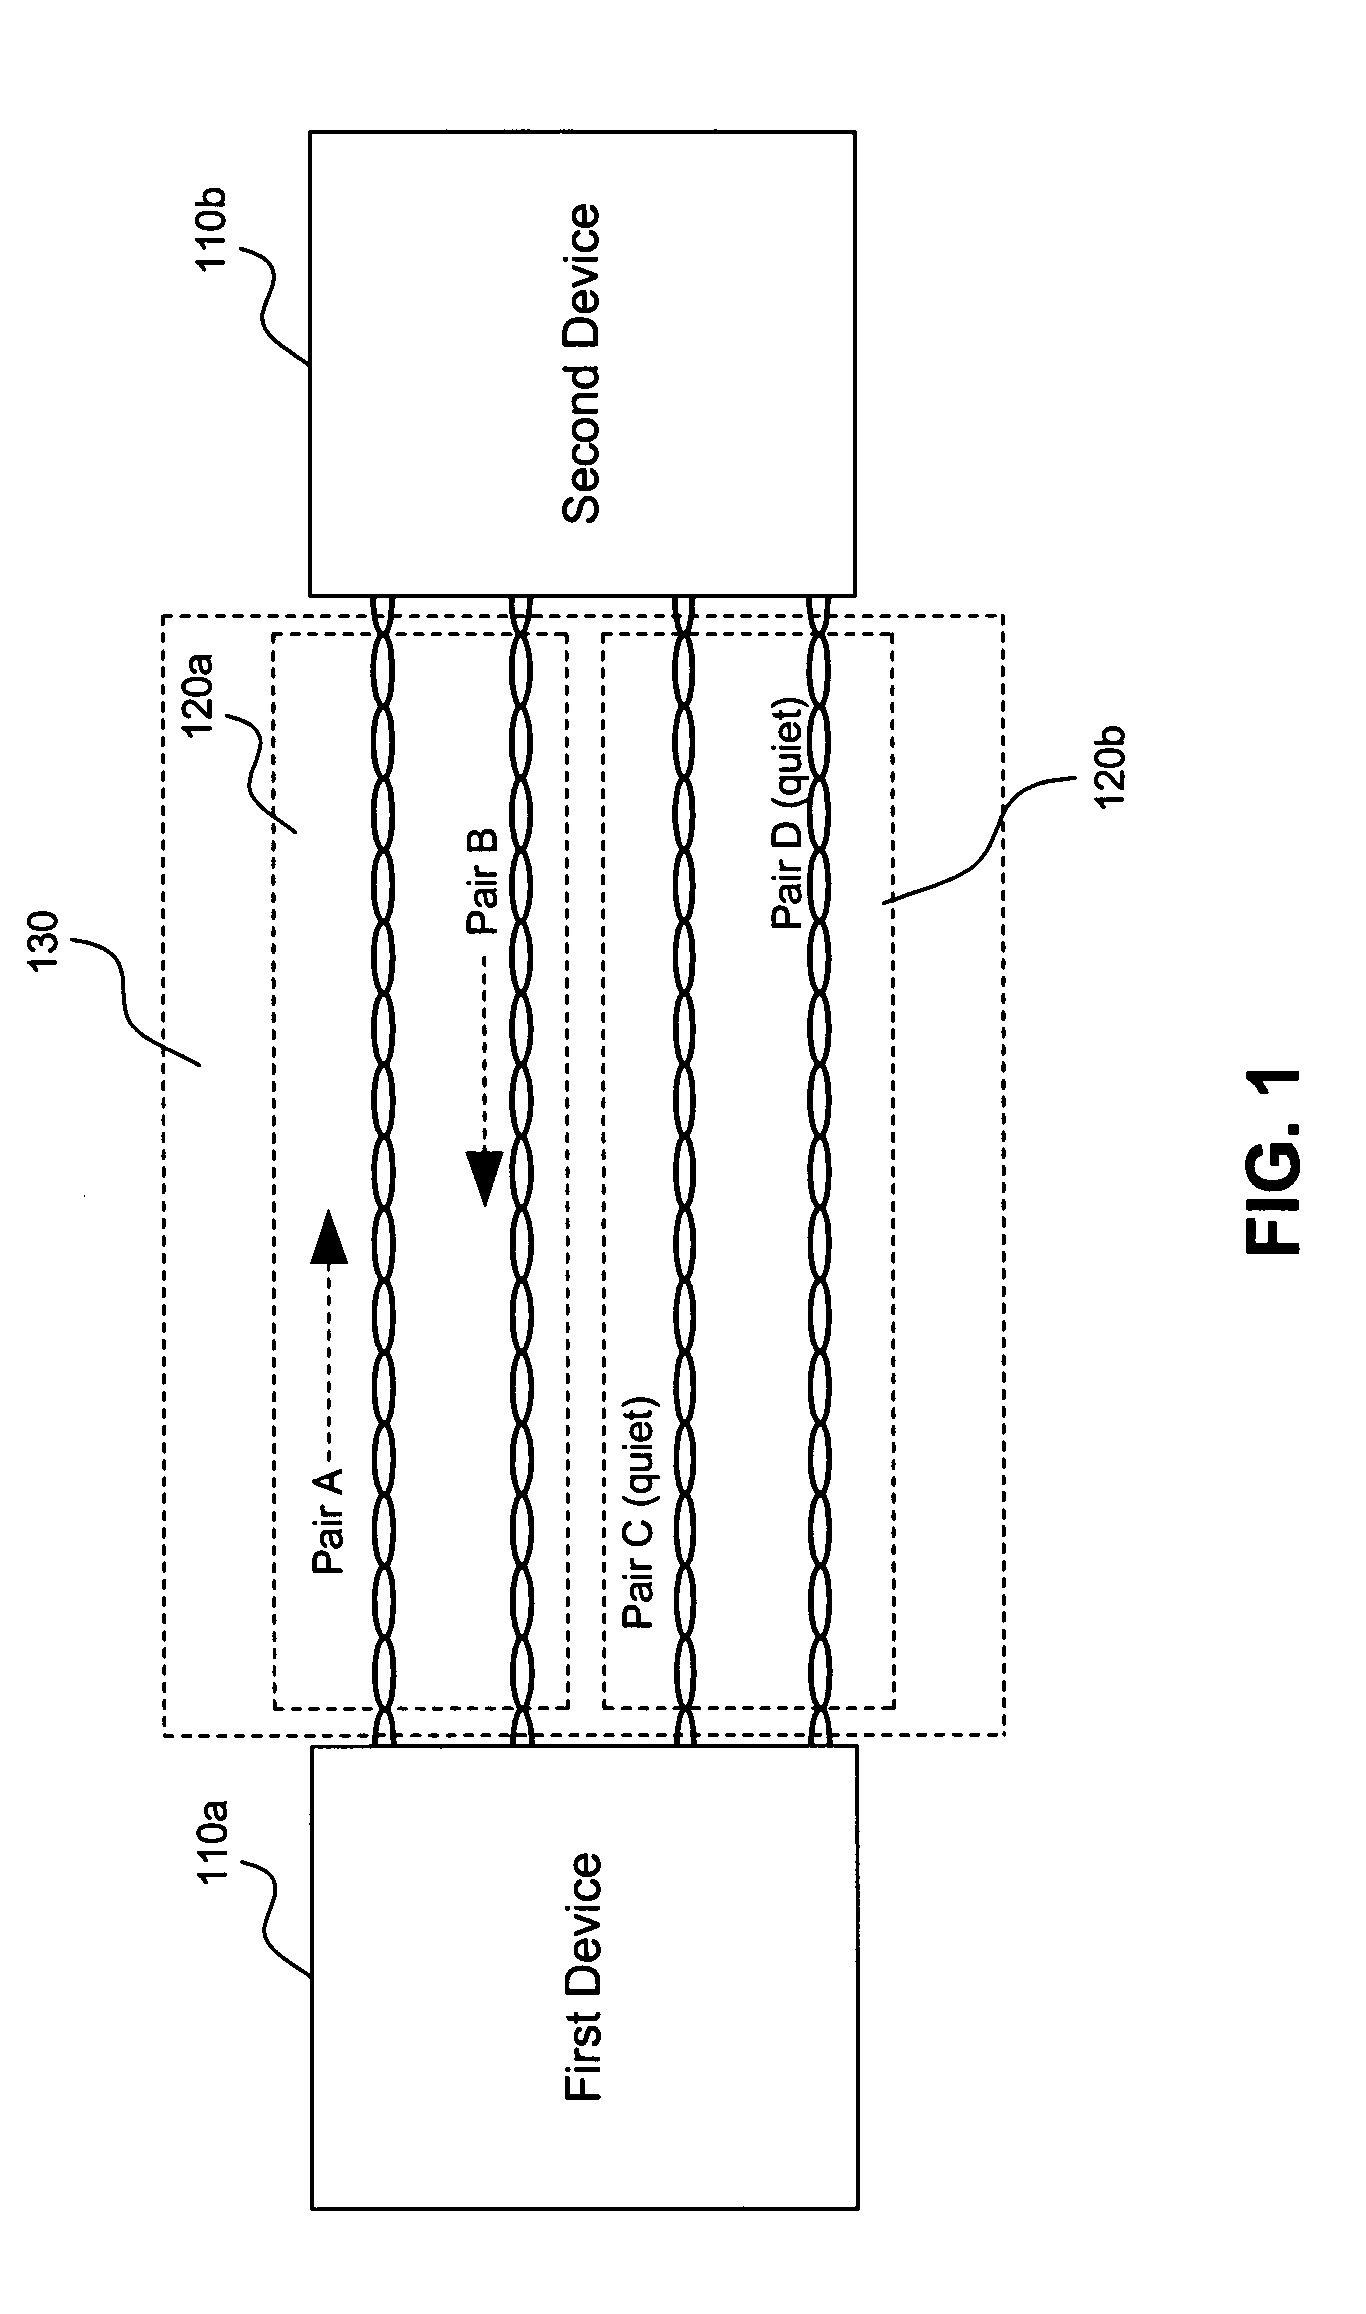 Apparatus and method for auto-negotiation in a communication system